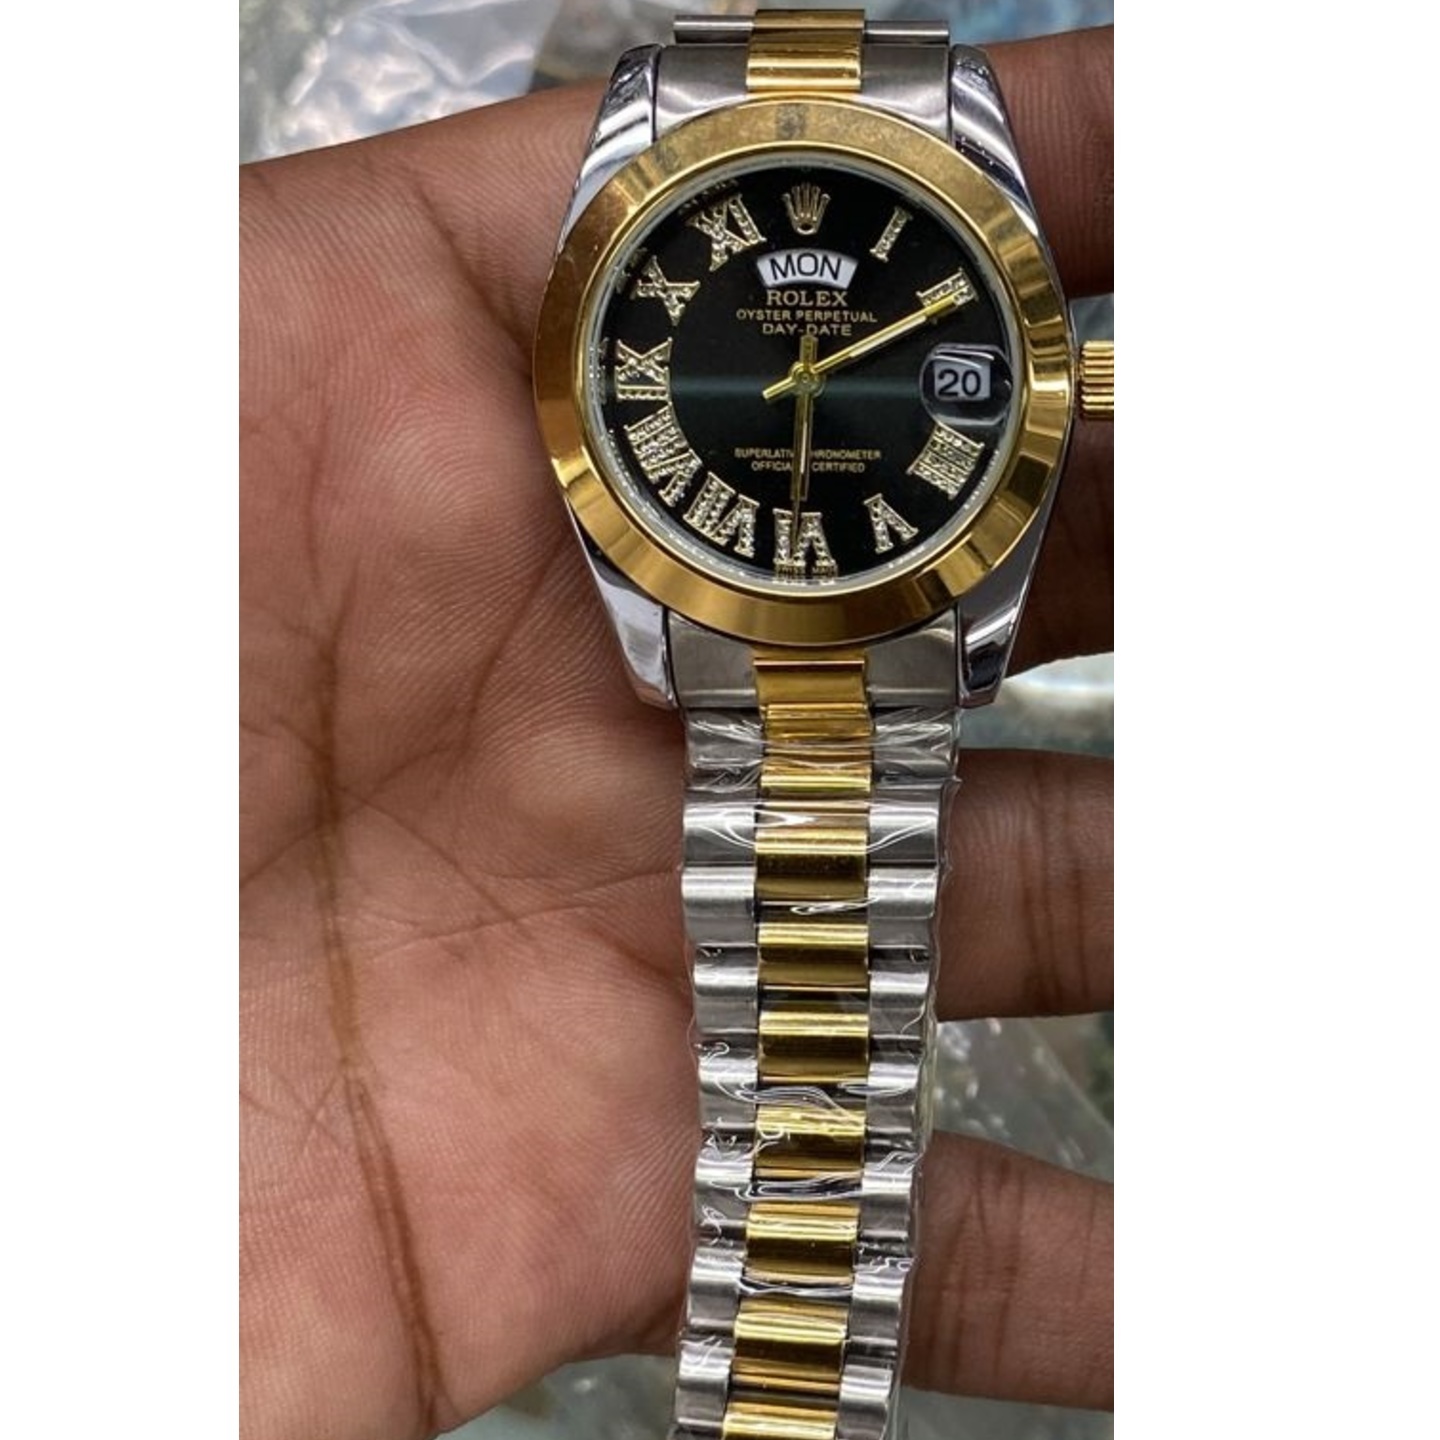 mkors, rolex, Rado,Guess,  tissot, versache, Watch as a gift,Wedding , Engagement, Anniversary, valentines day, fathers day , husband, michael kors